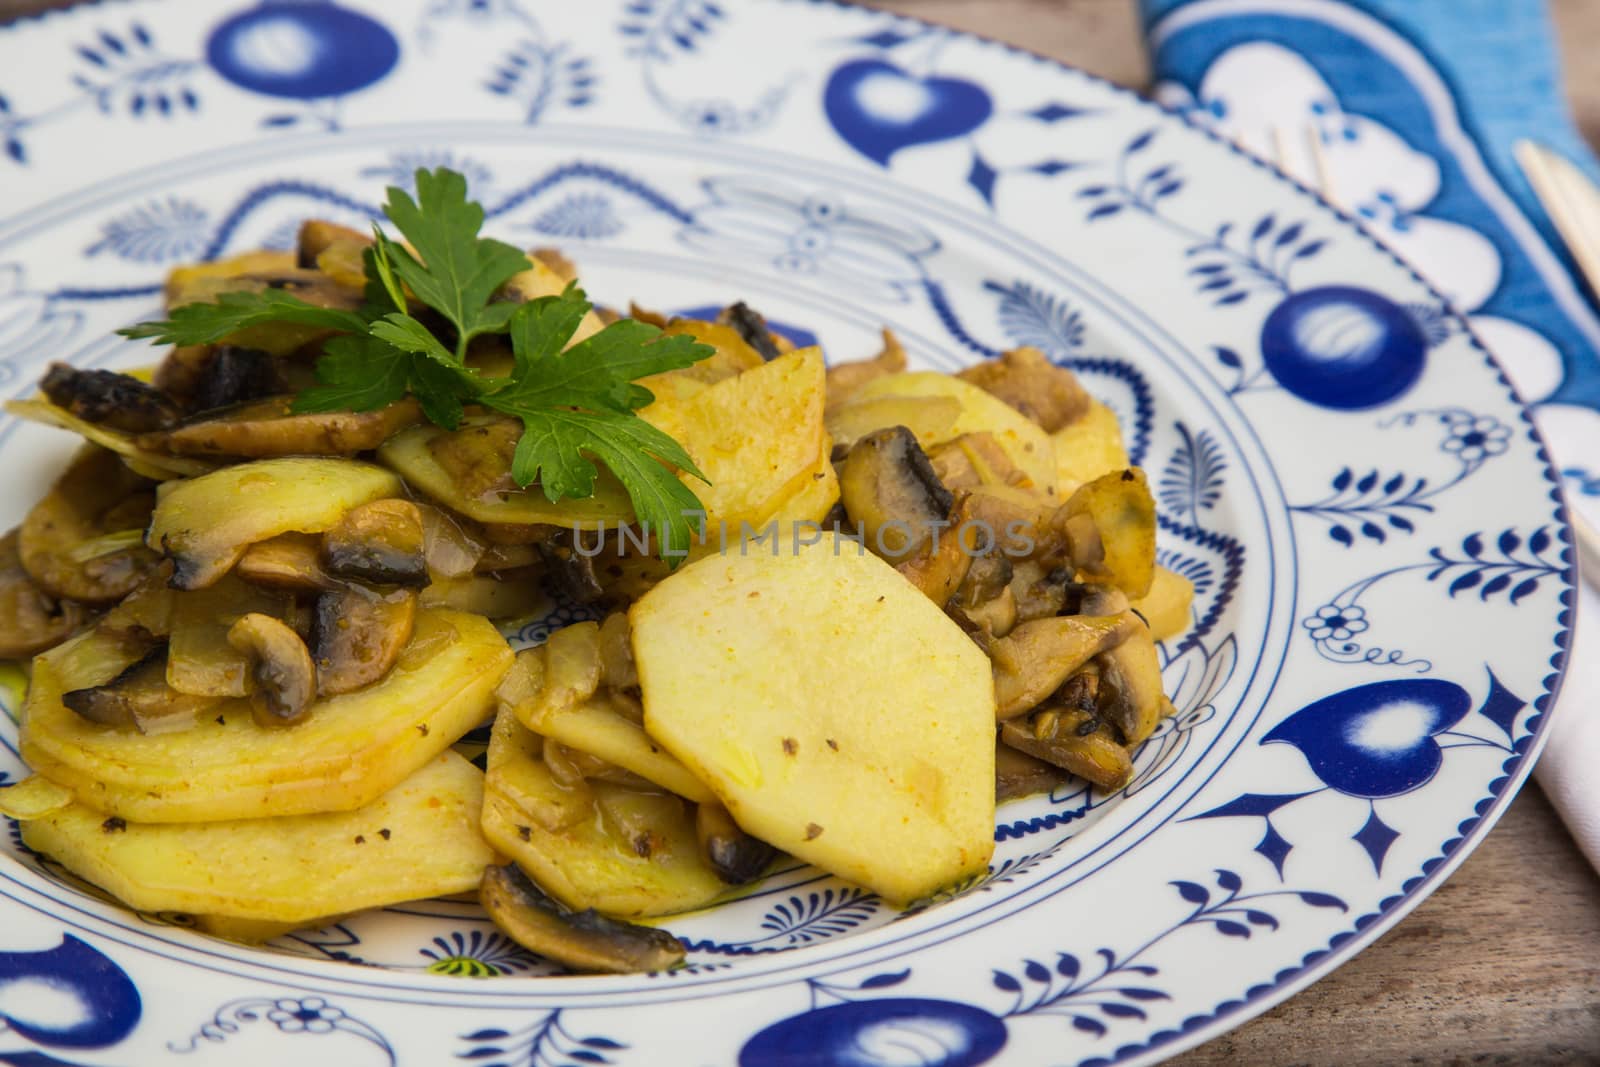 Baked potatoes with mushrooms and parsley on the white blue plate.